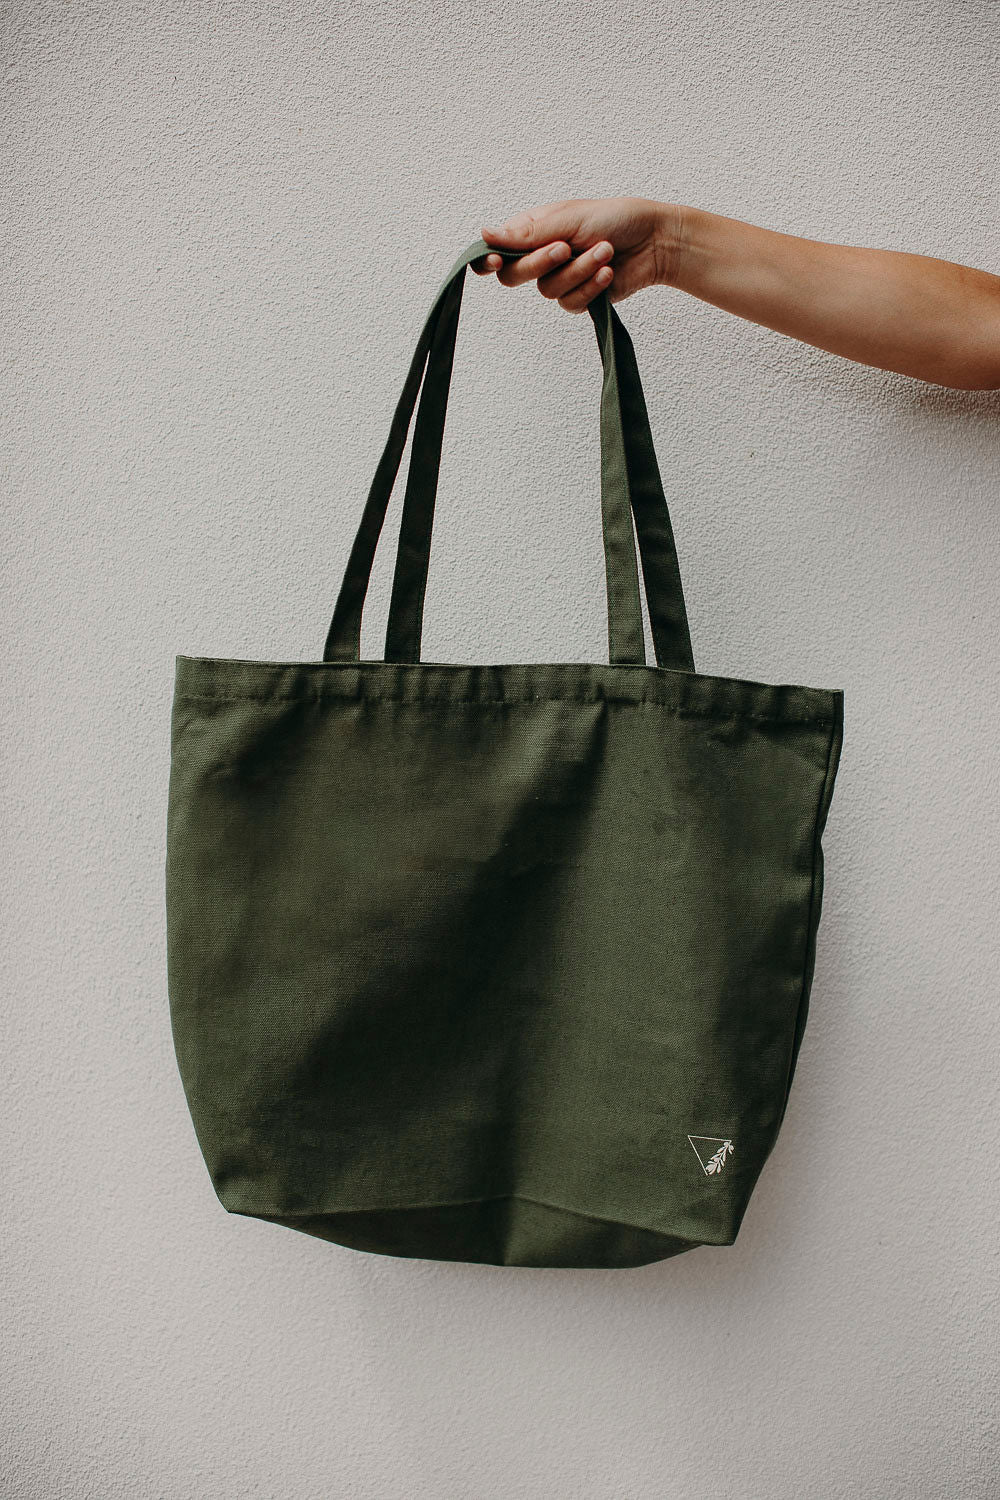 Cotton Tote Bag - Forest